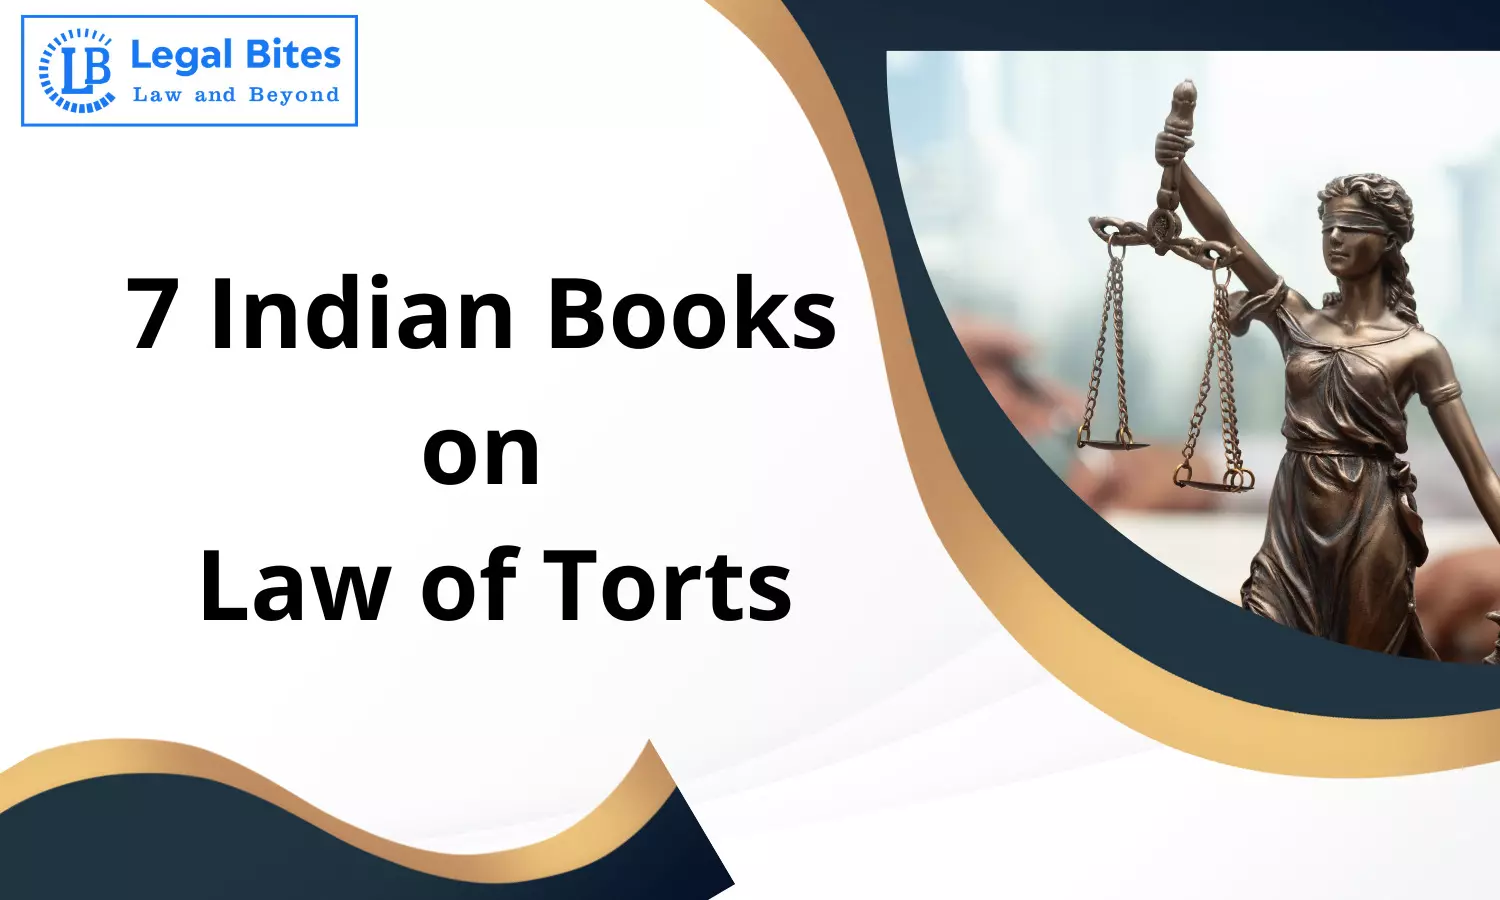 7 Indian Books on Law of Torts